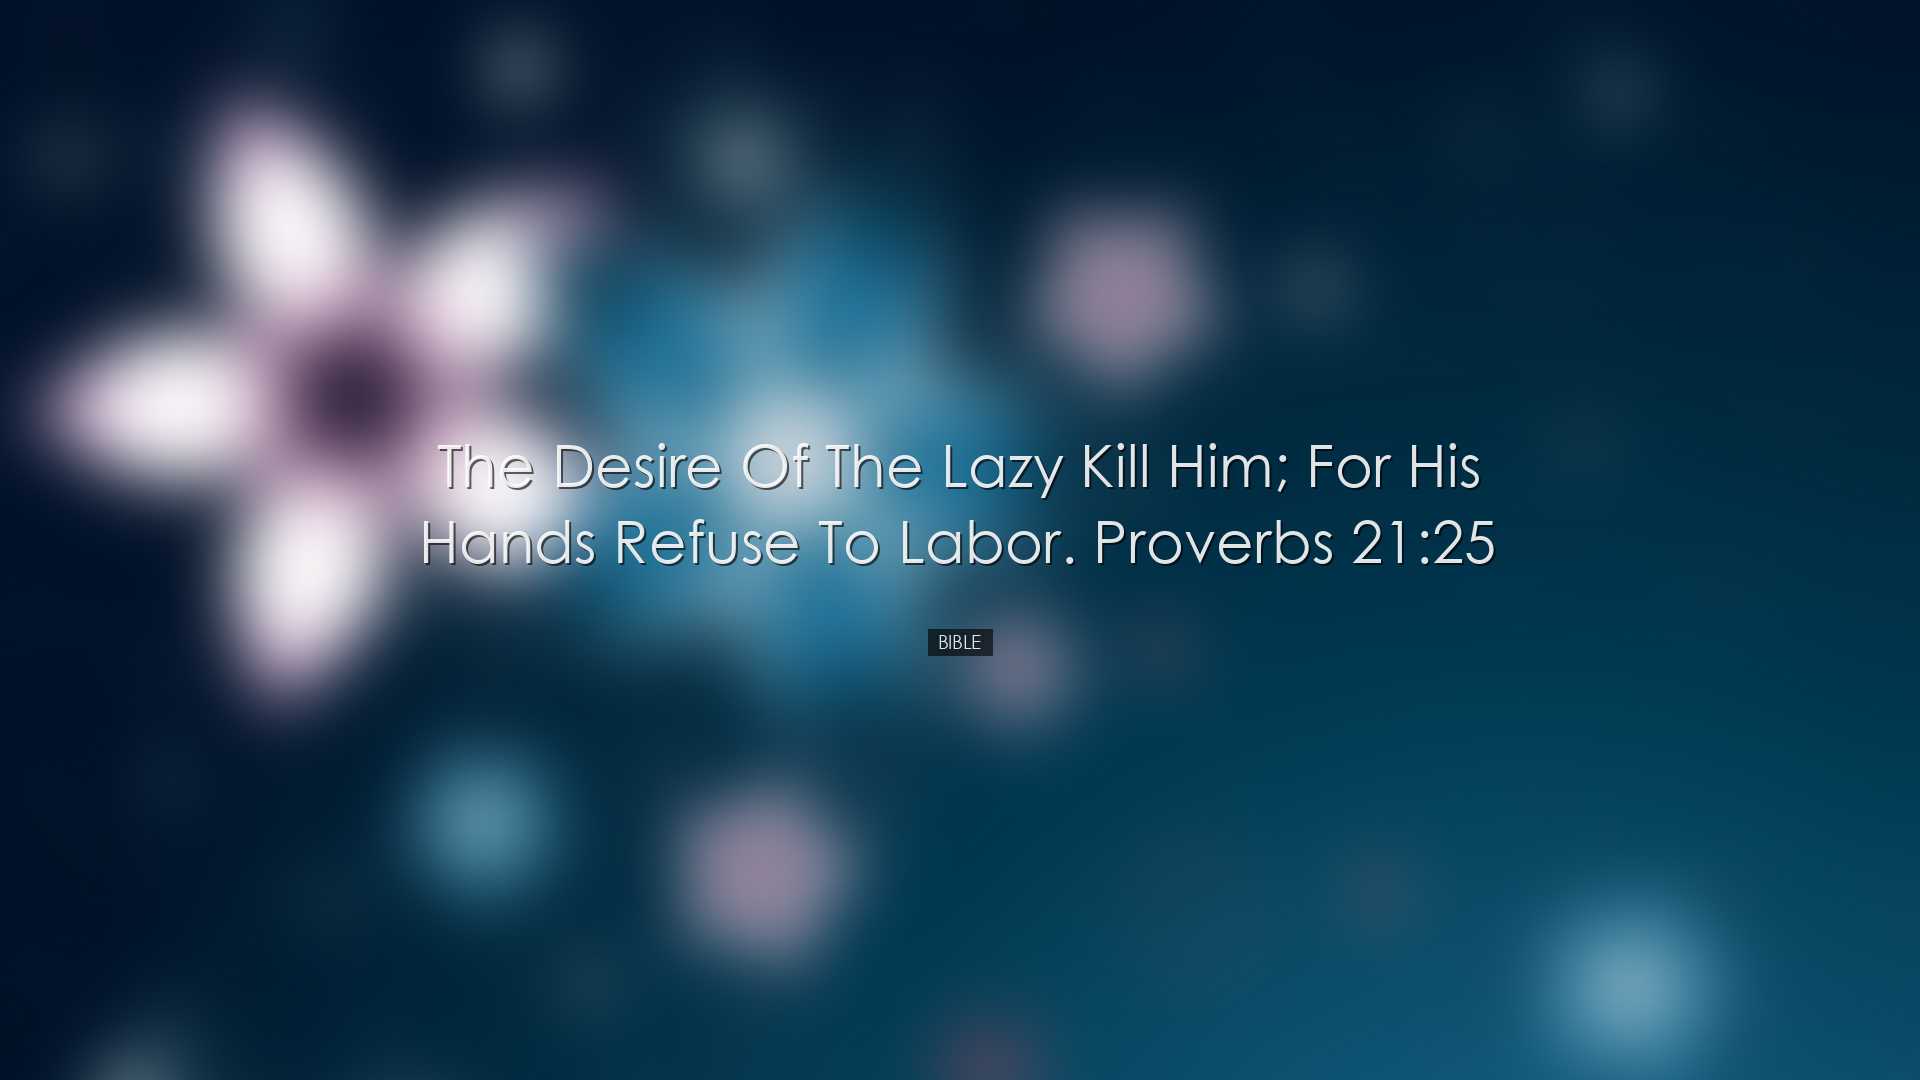 The desire of the lazy kill him; for his hands refuse to labor. Pr